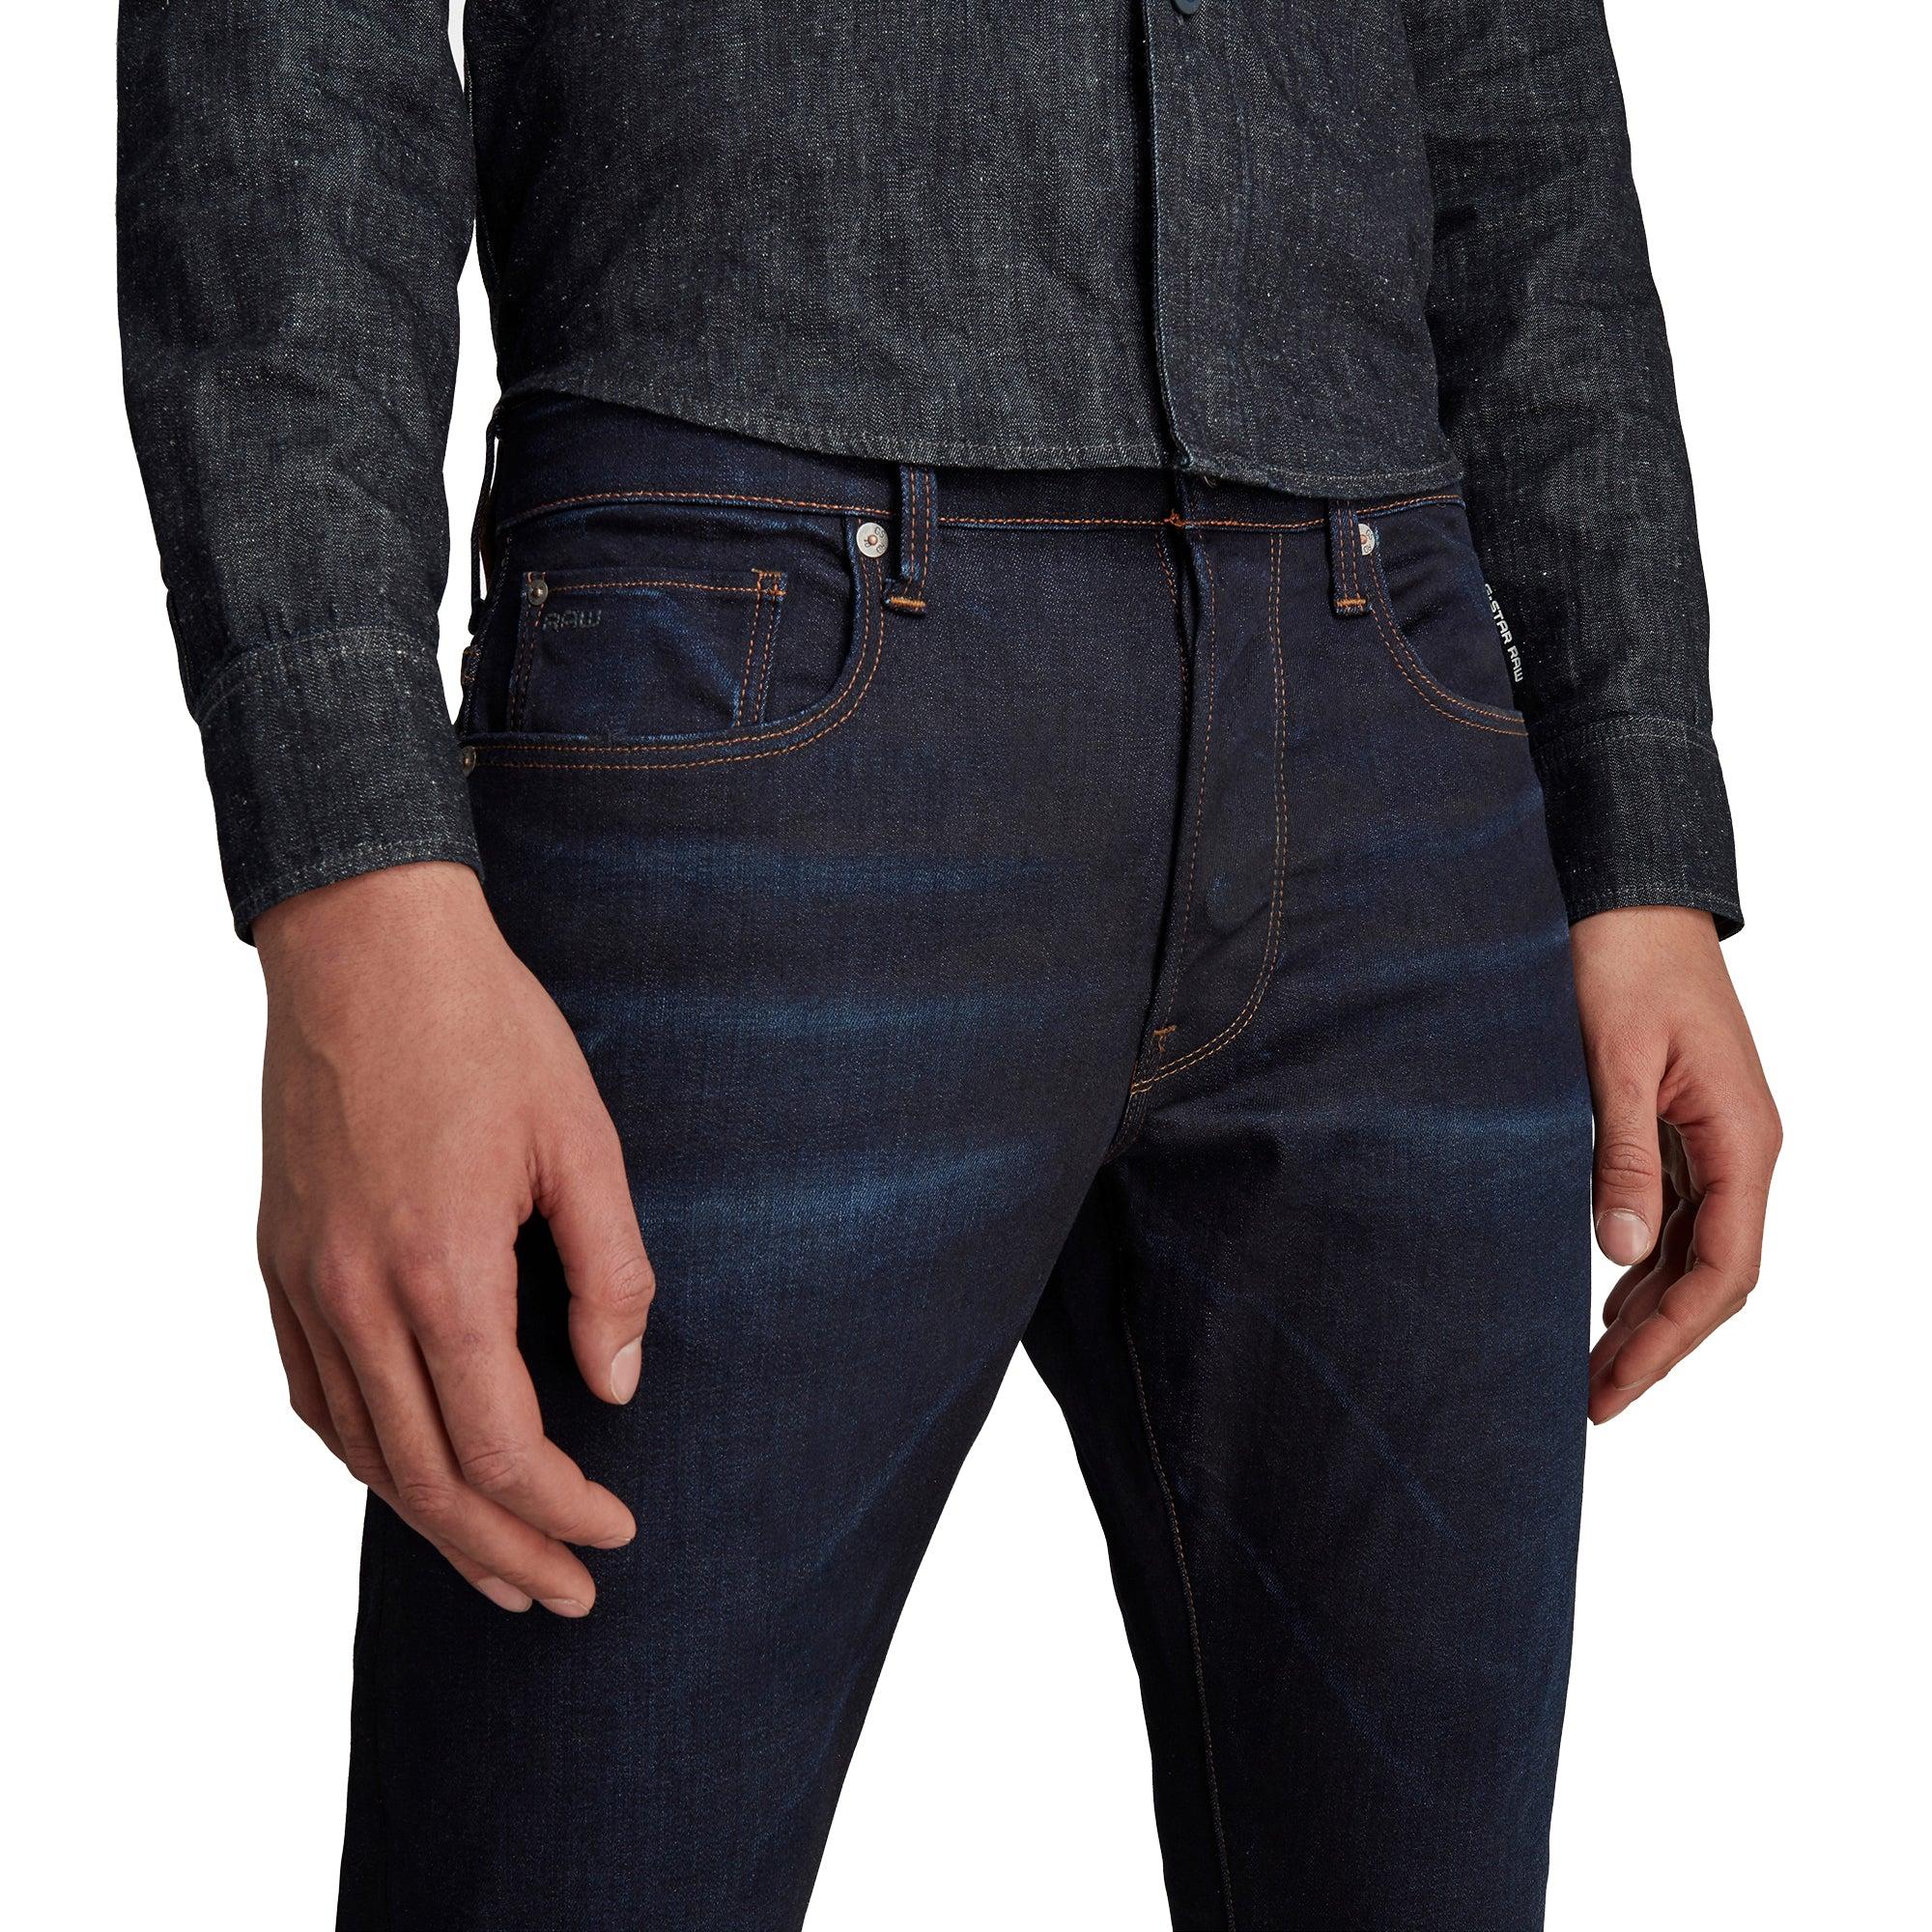 G-Star Raw 3301 tapered jeans w31 l32 calcetines para vaqueros classc Jeans